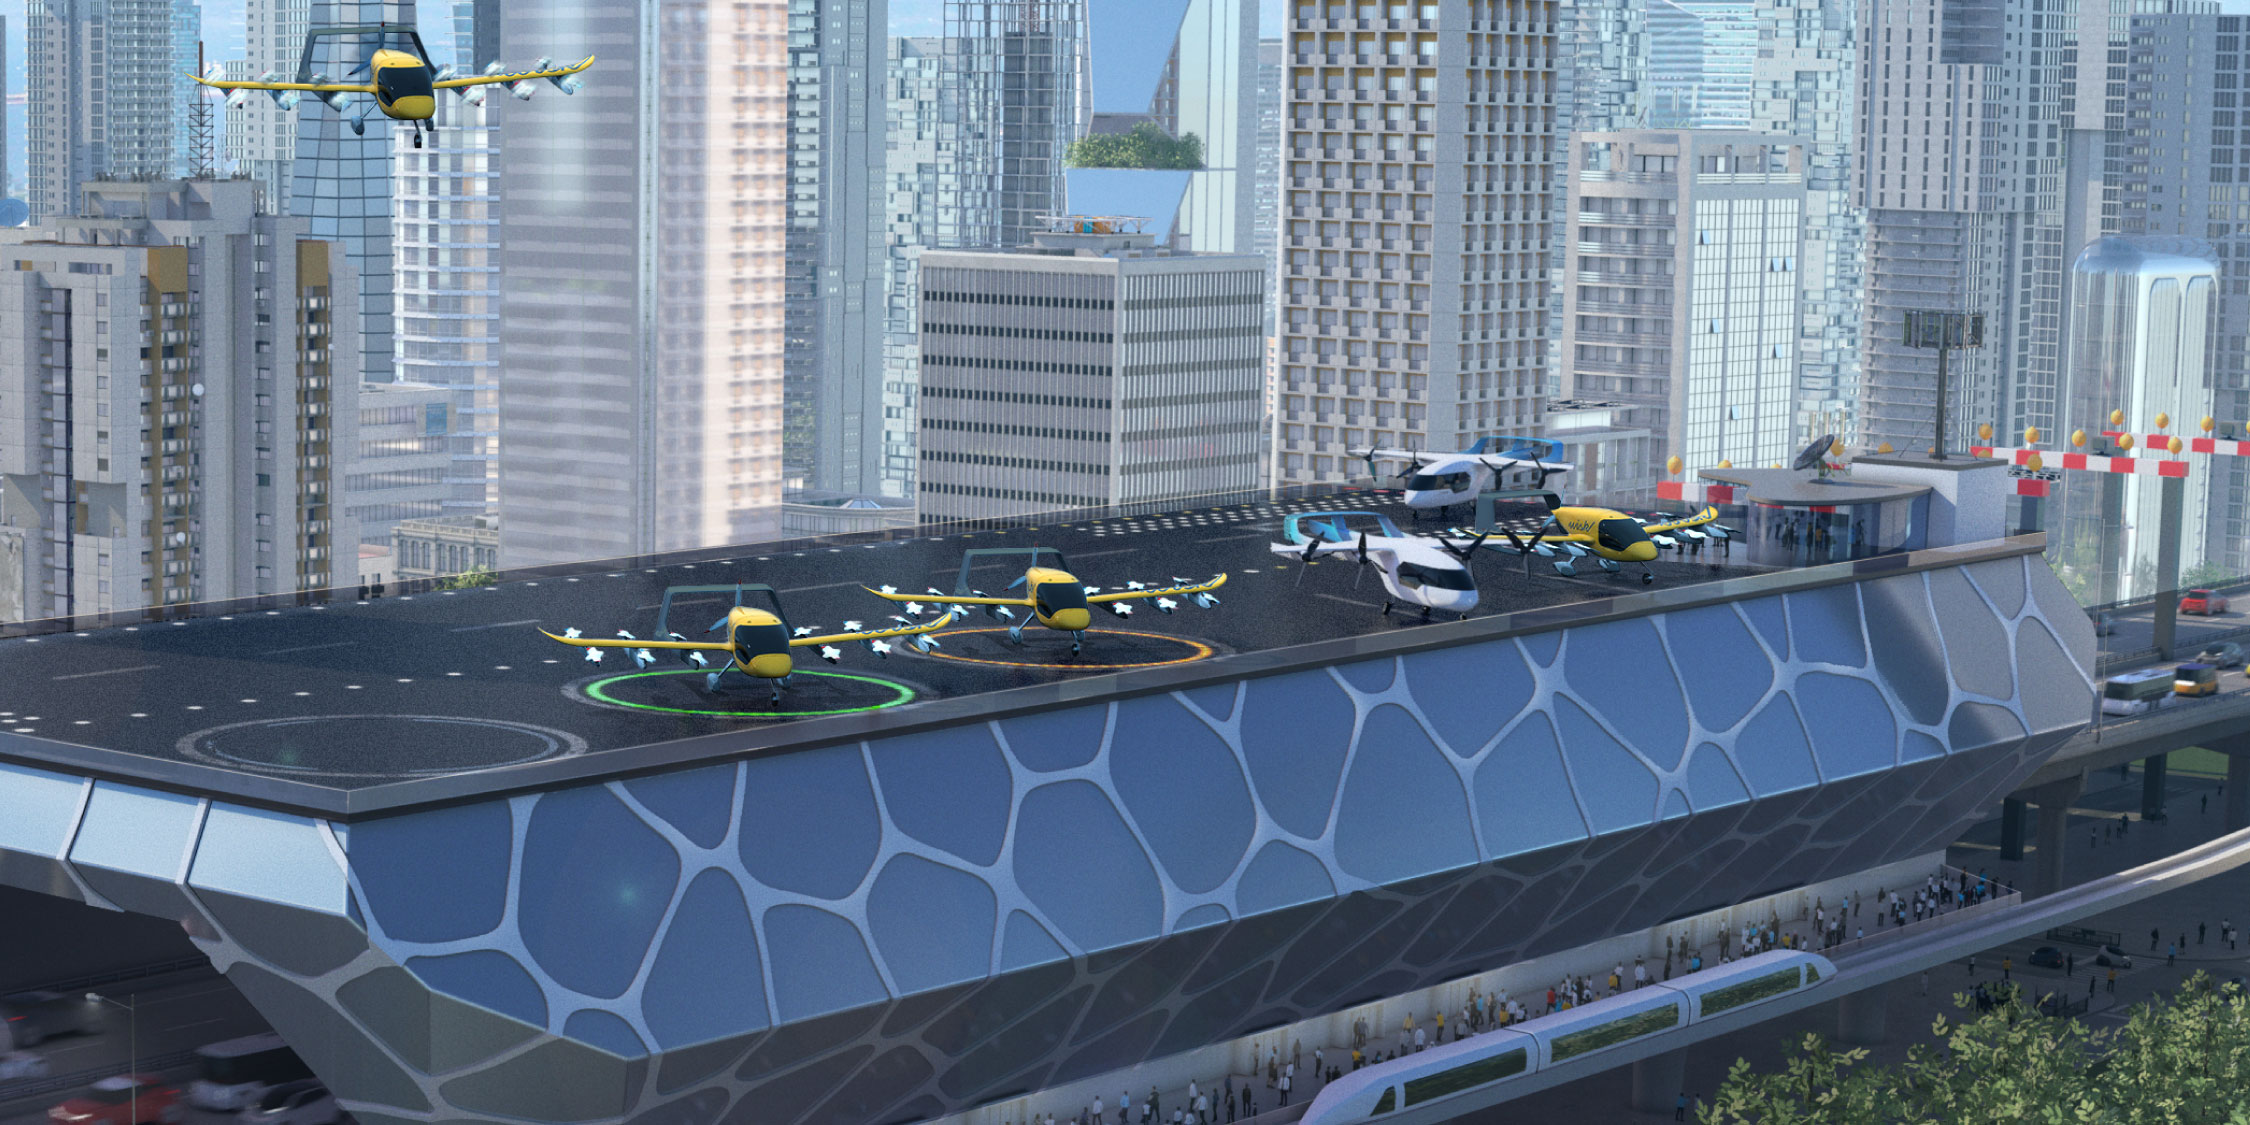 Boeing and Wisk Unveil Concept of Operations for Urban Air Mobility